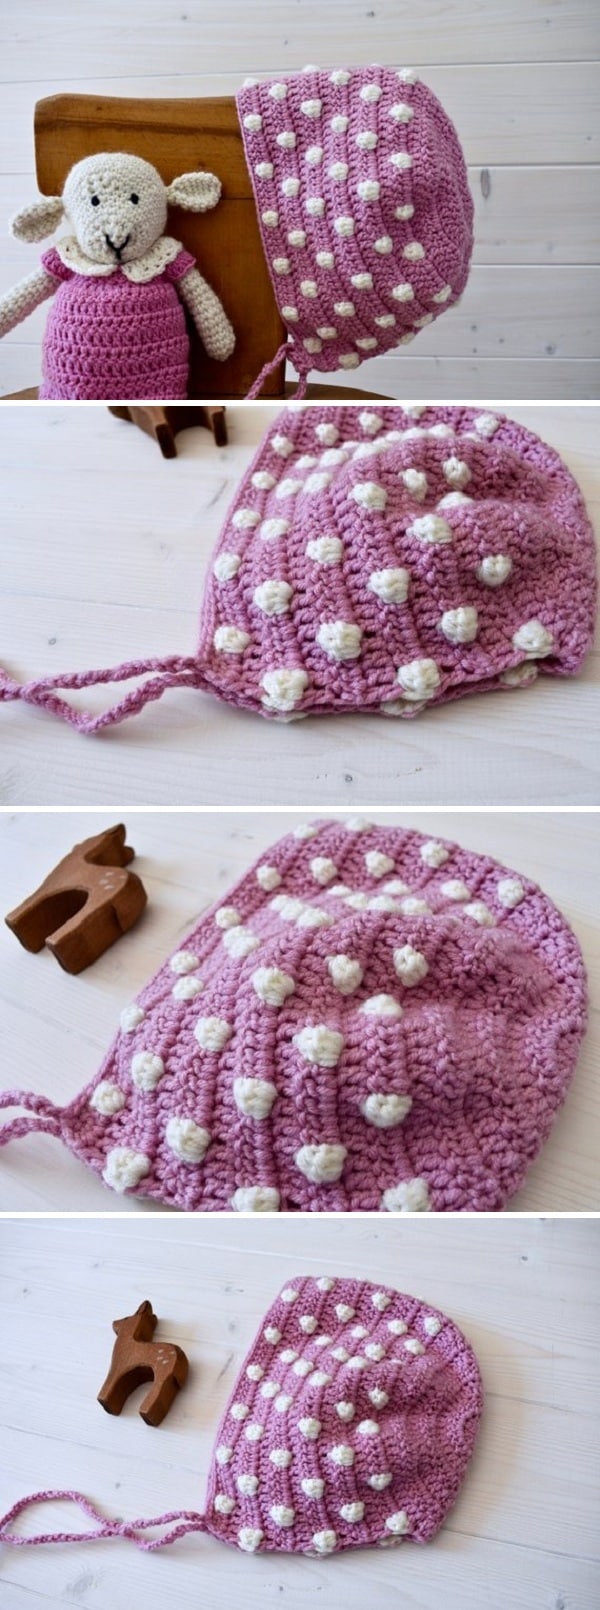 This tutorial will show you how to Crochet Bobble Stitch Hat. This tutorial is suitable for beginners.